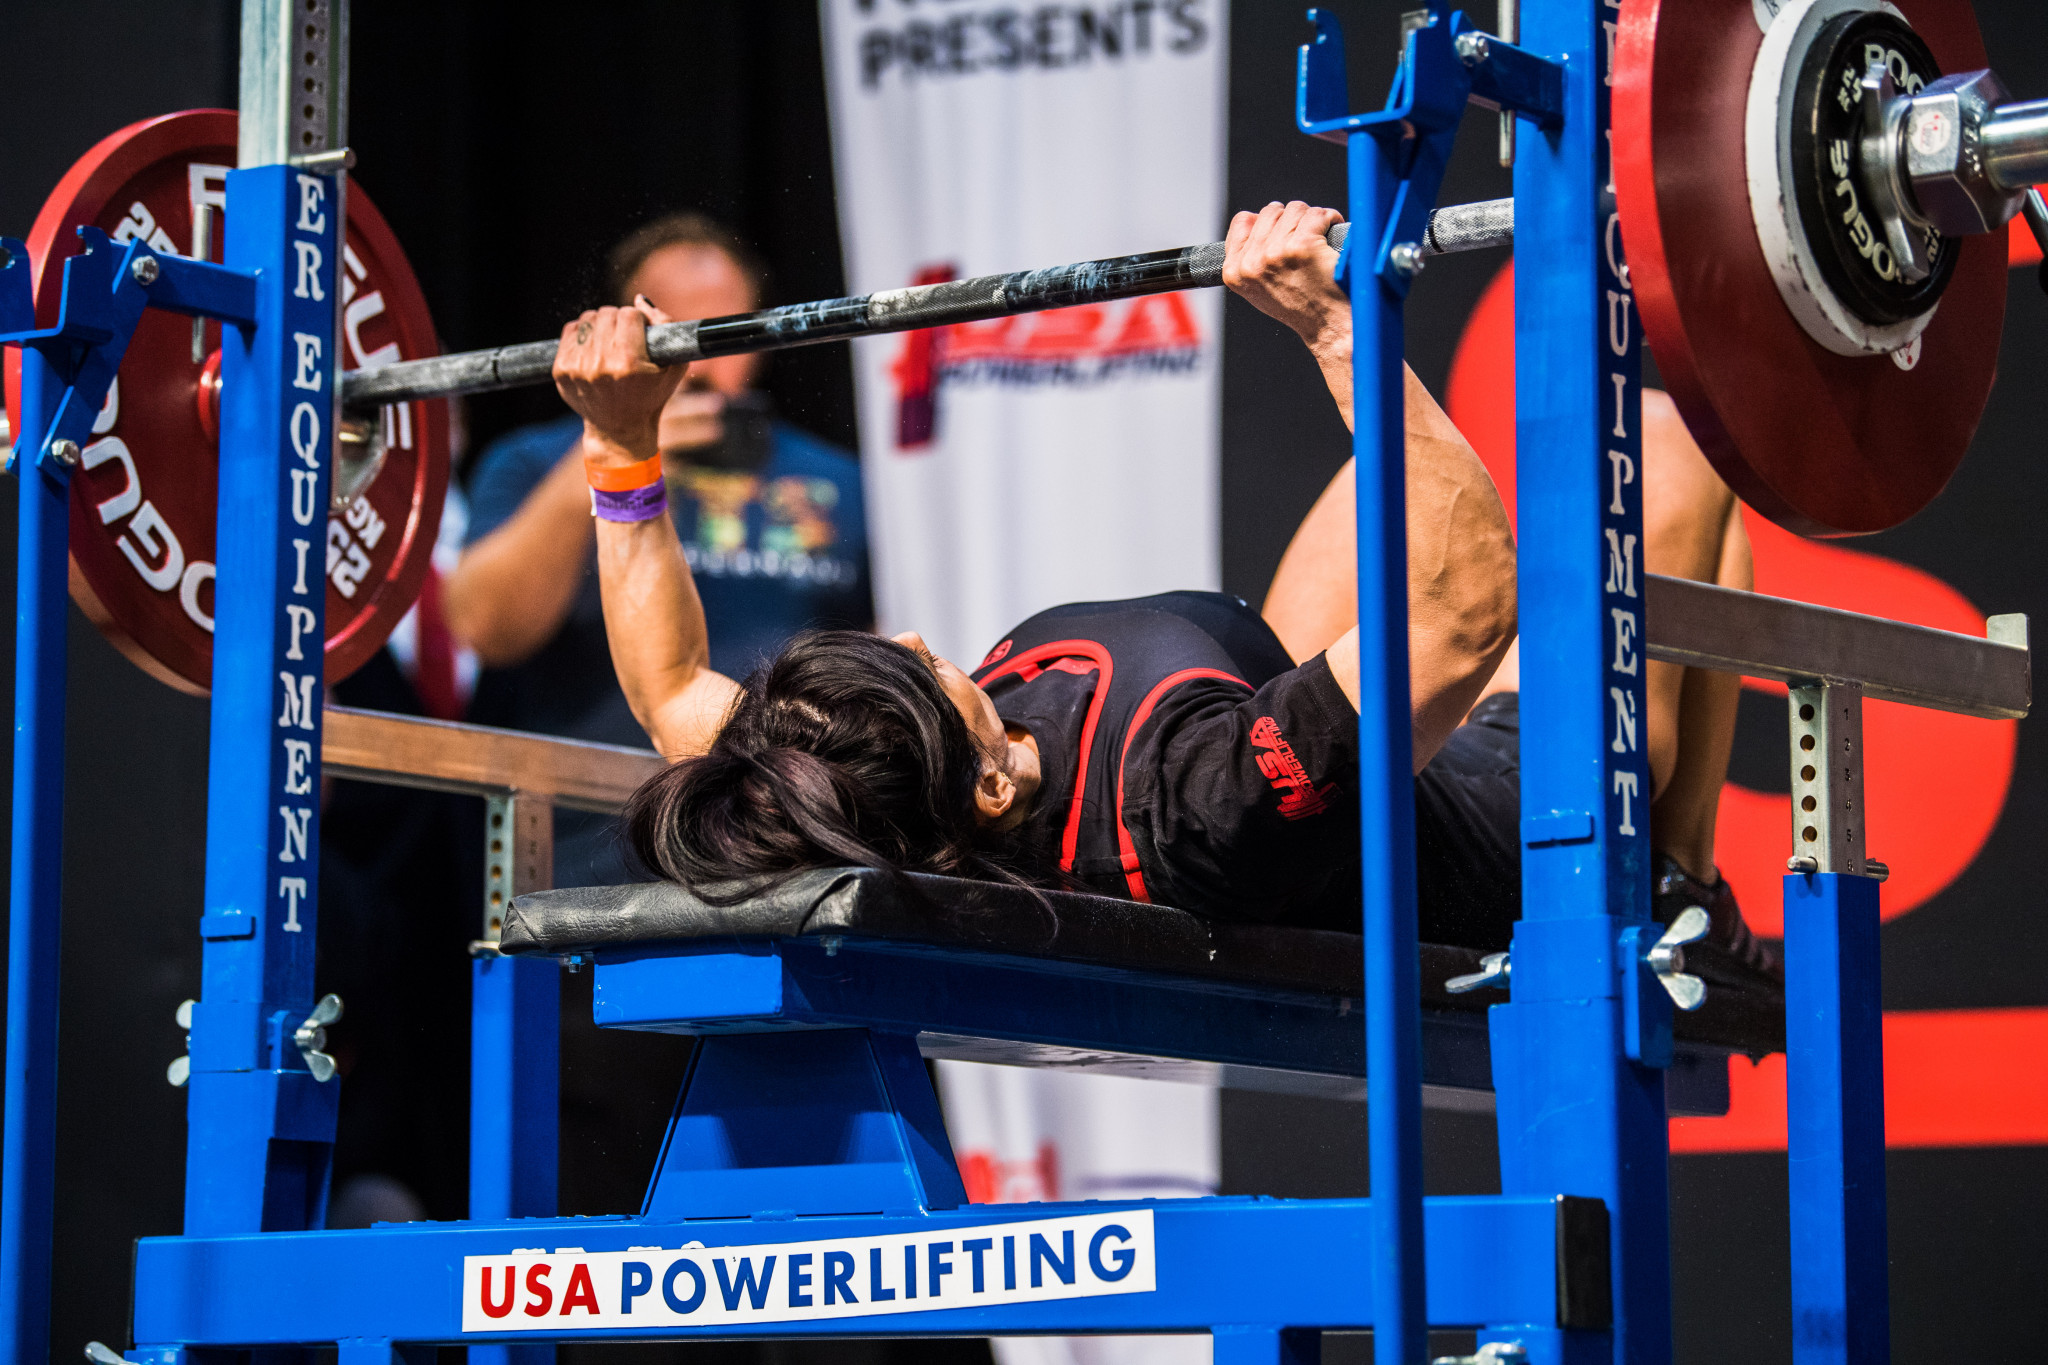 USA Powerlifting organises nearly 400 competition per year and carries out 2,000 drugs tests ©USAPL